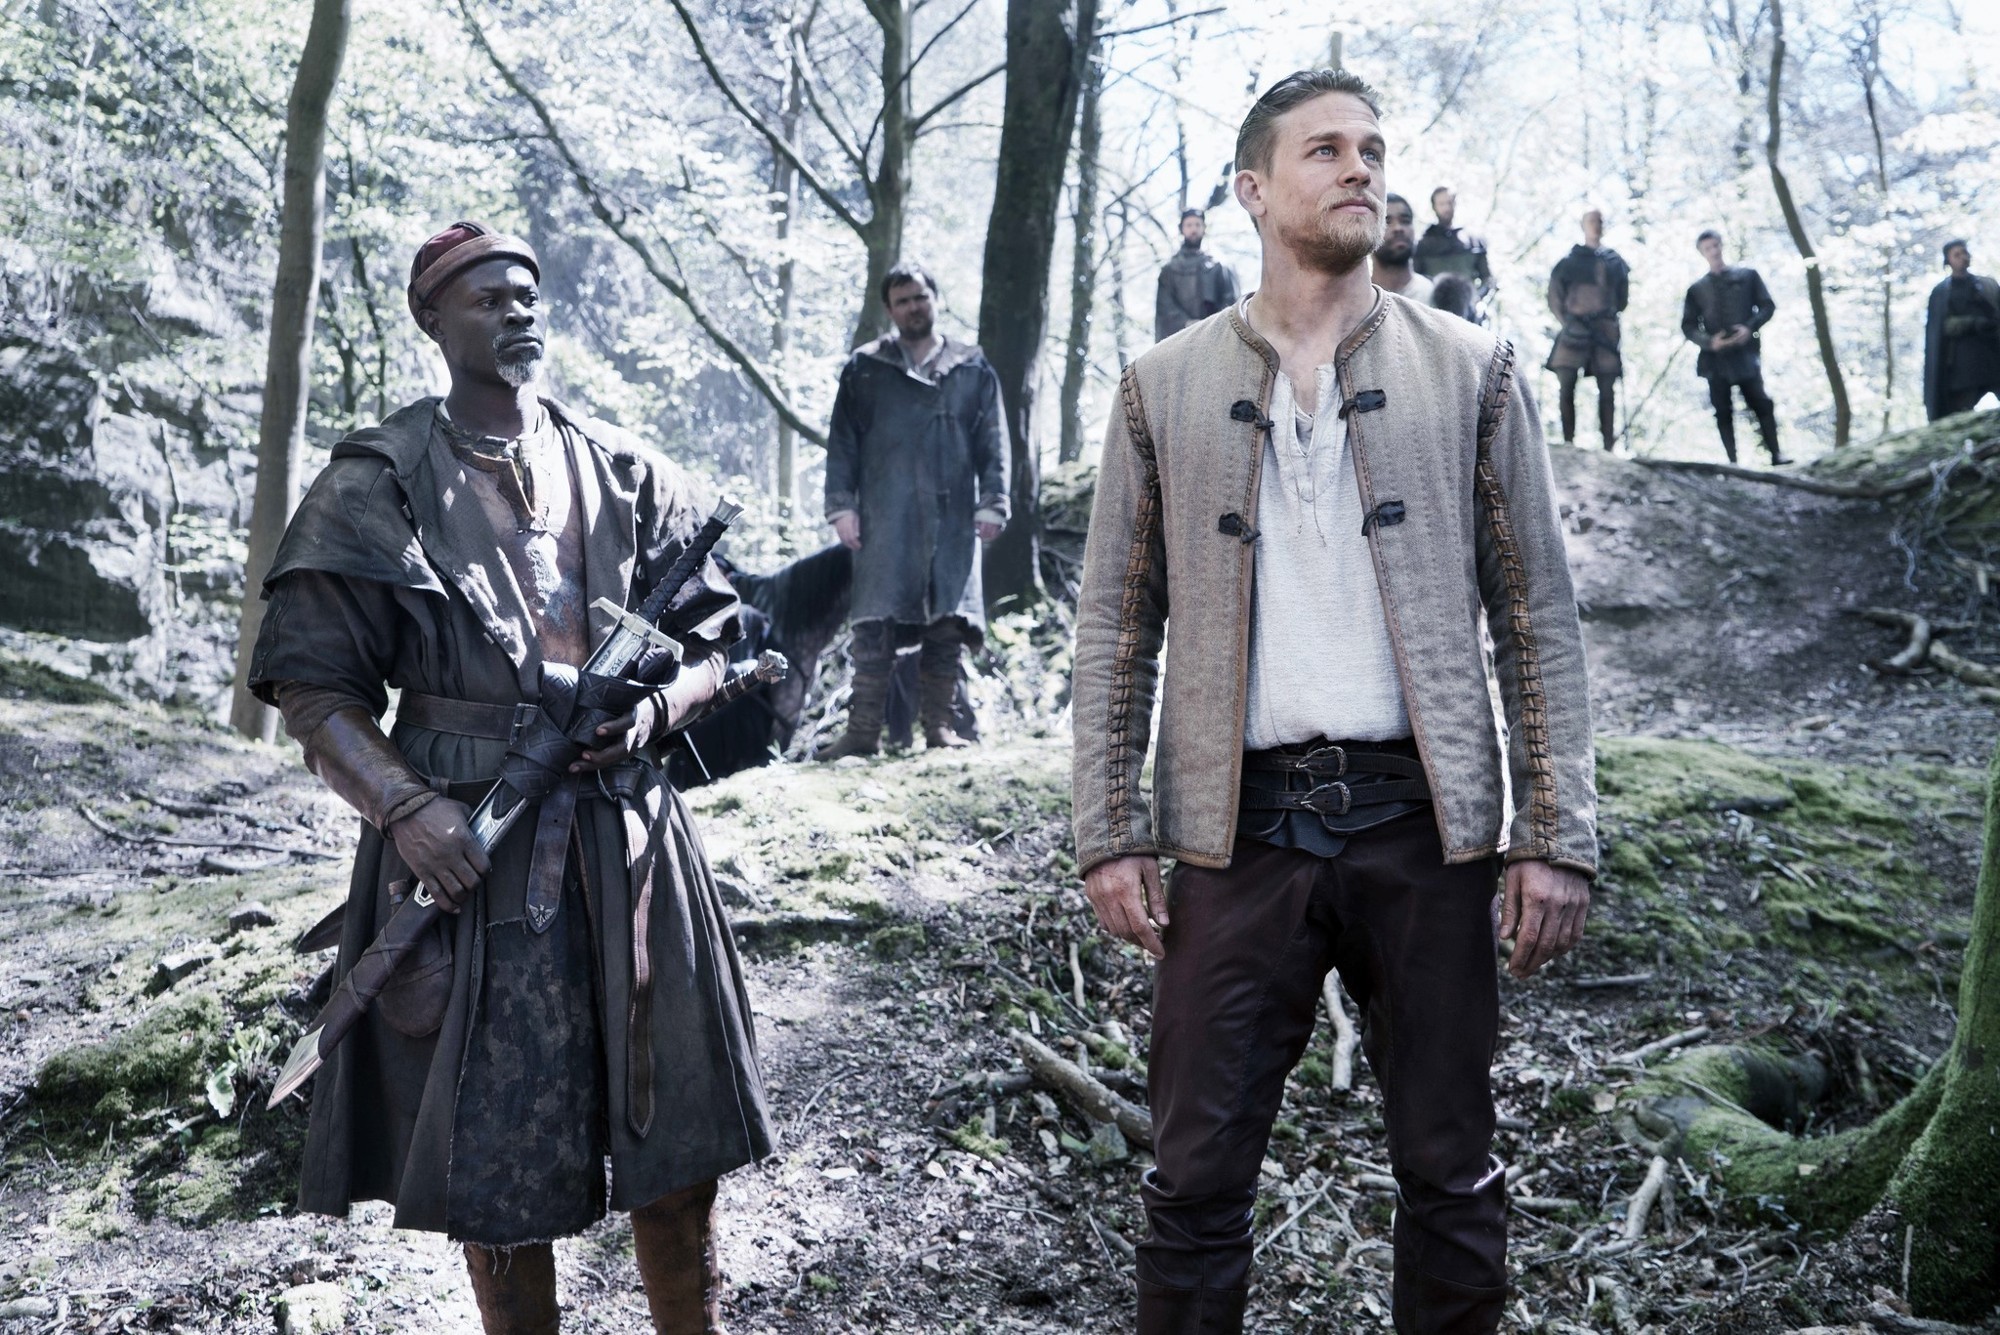 Djimon Hounsou stars as Sir Bedivere and Charlie Hunnam stars as King Arthur in Warner Bros. Pictures' King Arthur: Legend of the Sword (2017)